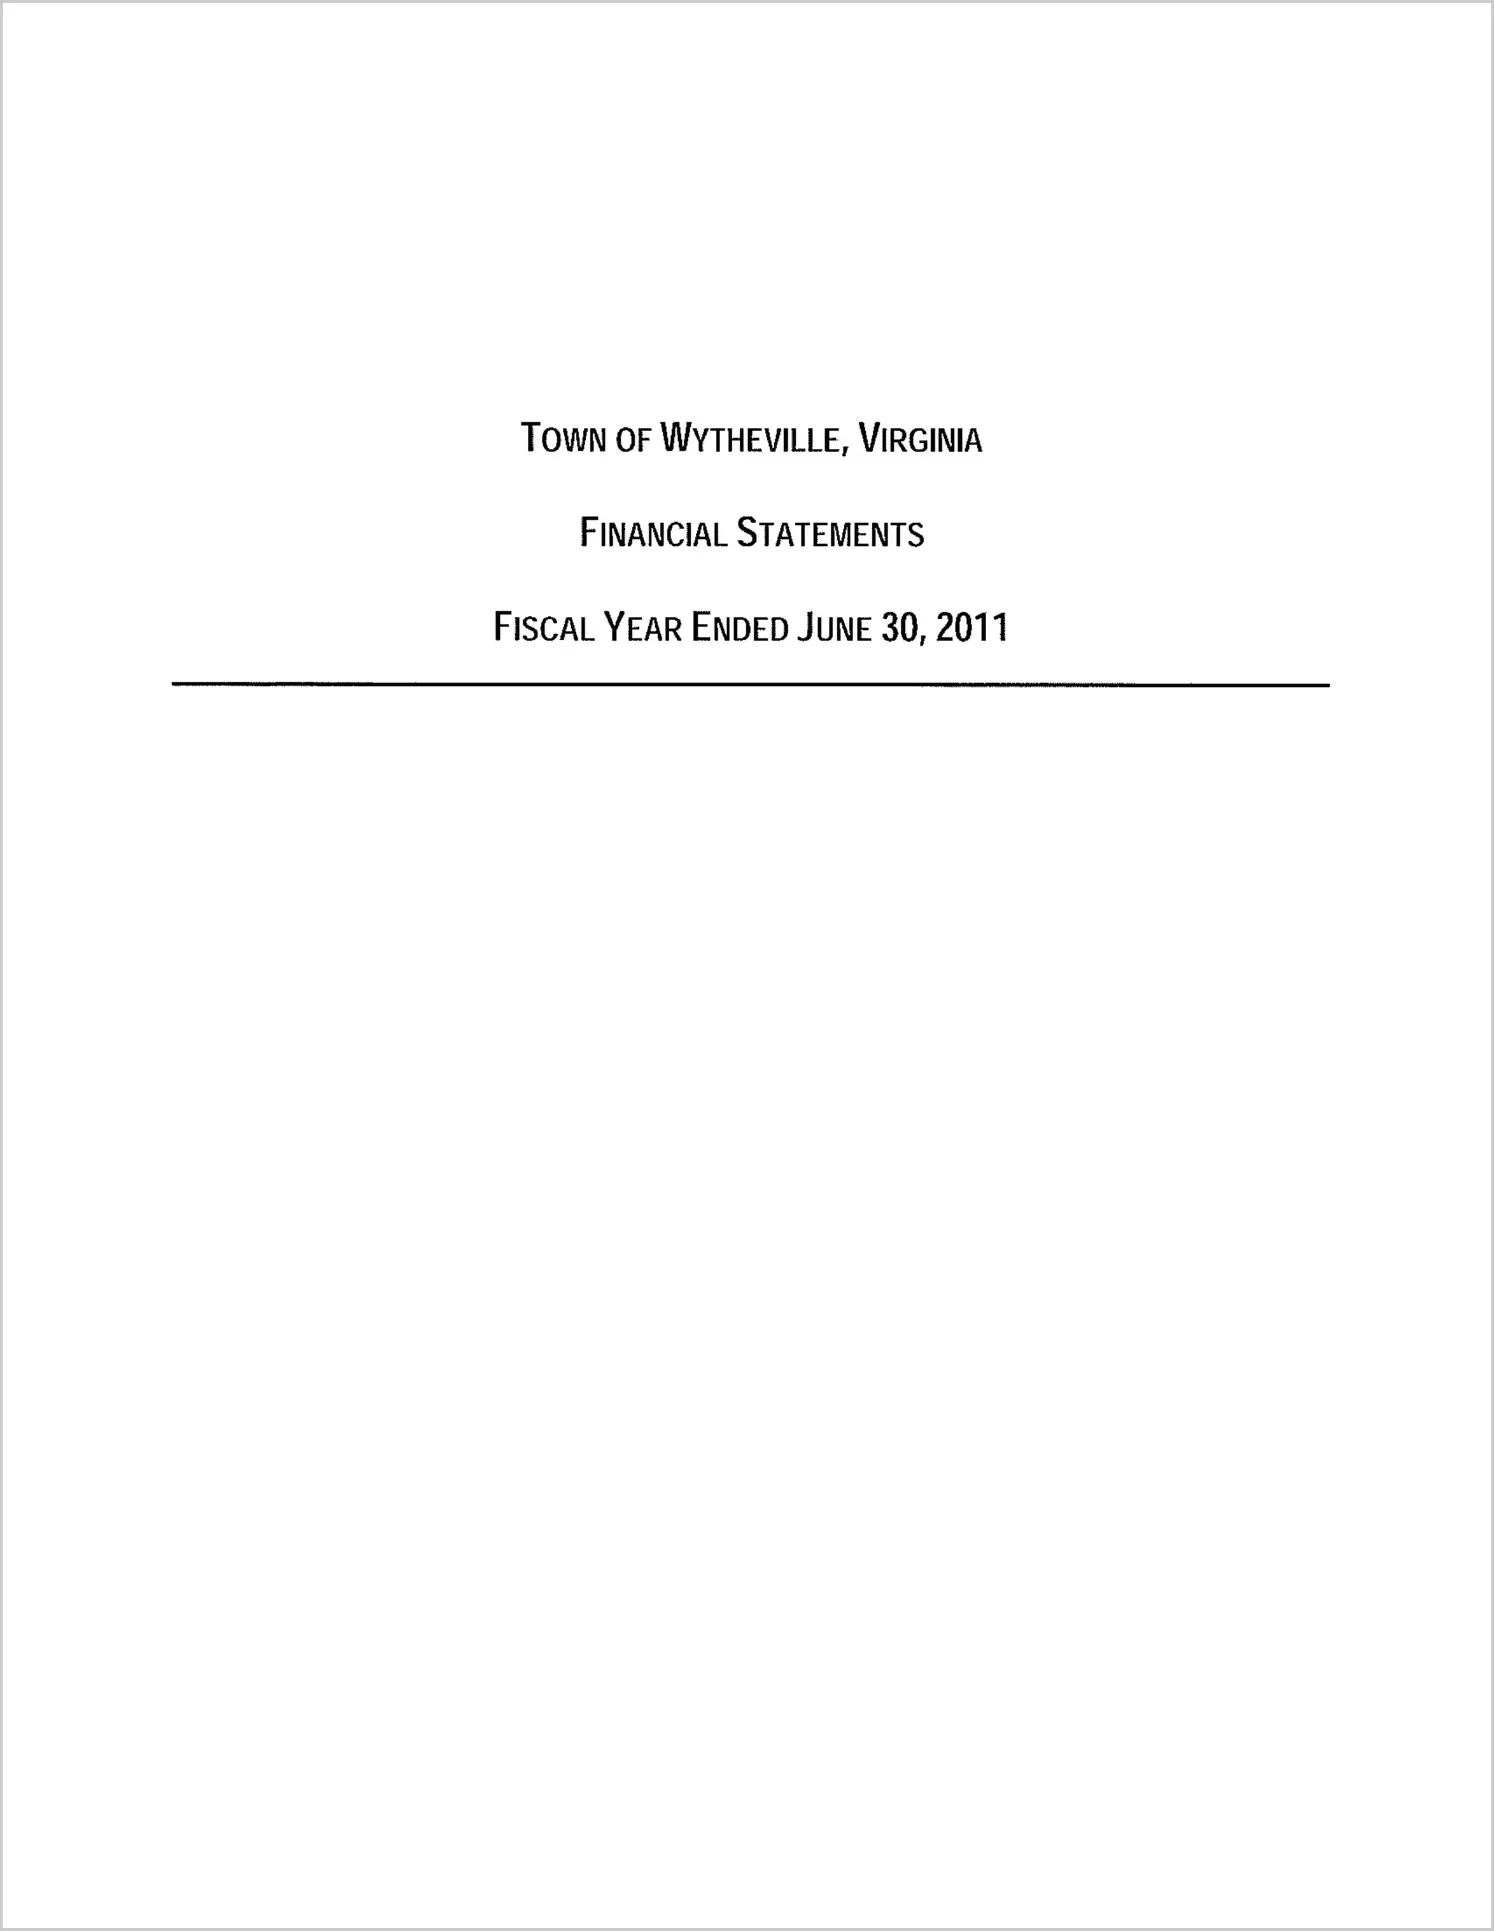 2011 Annual Financial Report for Town of Wytheville